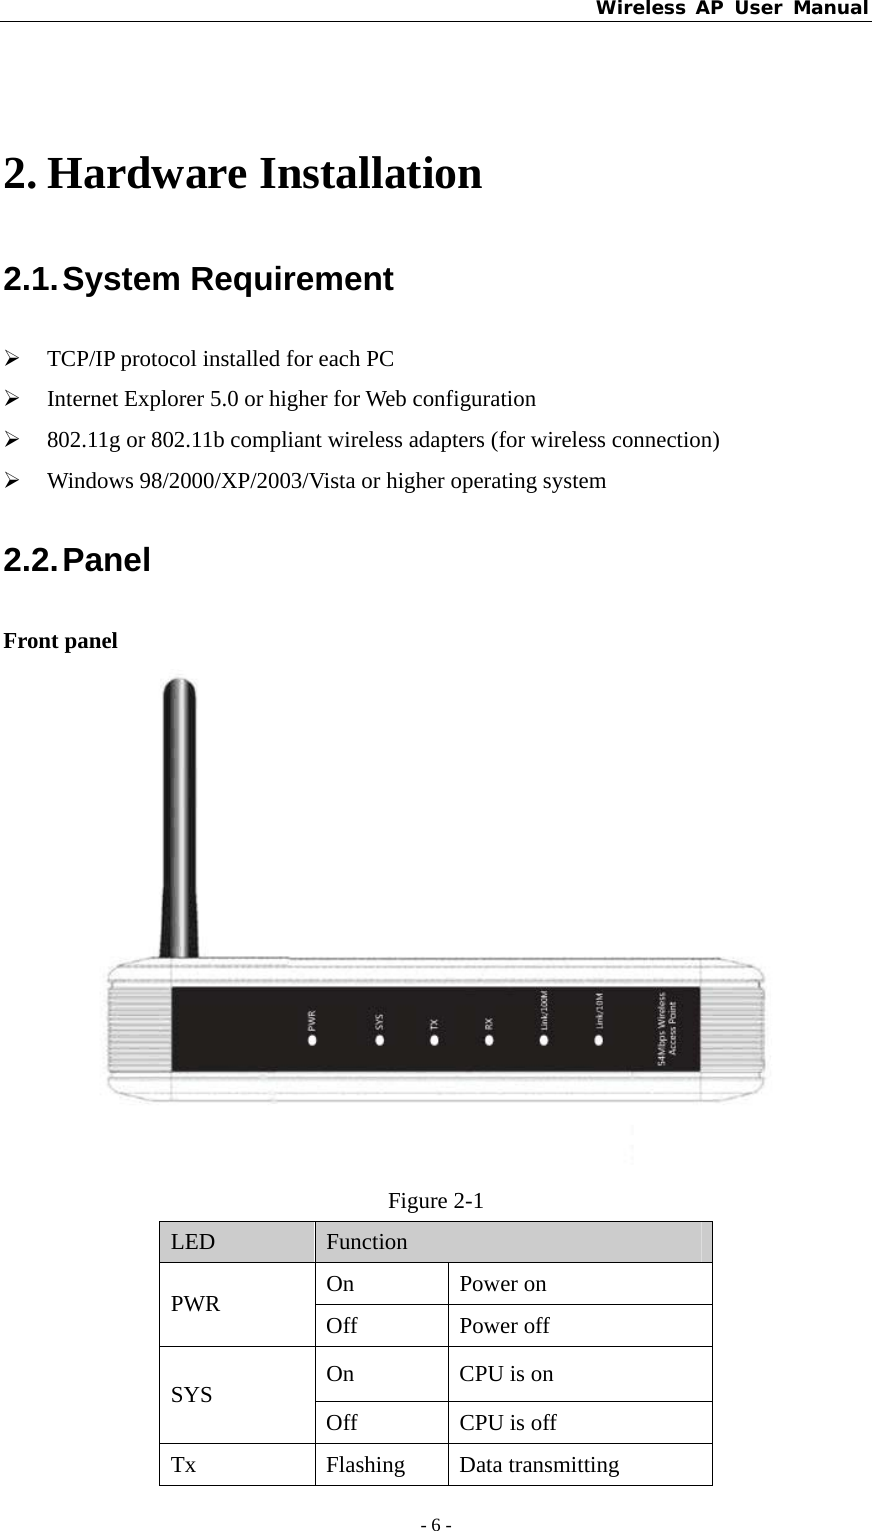 Wireless AP User Manual - 6 -   2. Hardware Installation 2.1. System  Requirement ¾ TCP/IP protocol installed for each PC ¾ Internet Explorer 5.0 or higher for Web configuration ¾ 802.11g or 802.11b compliant wireless adapters (for wireless connection) ¾ Windows 98/2000/XP/2003/Vista or higher operating system 2.2. Panel Front panel  Figure 2-1 LED  Function On Power on PWR  Off Power off On  CPU is on SYS Off  CPU is off Tx Flashing Data transmitting 